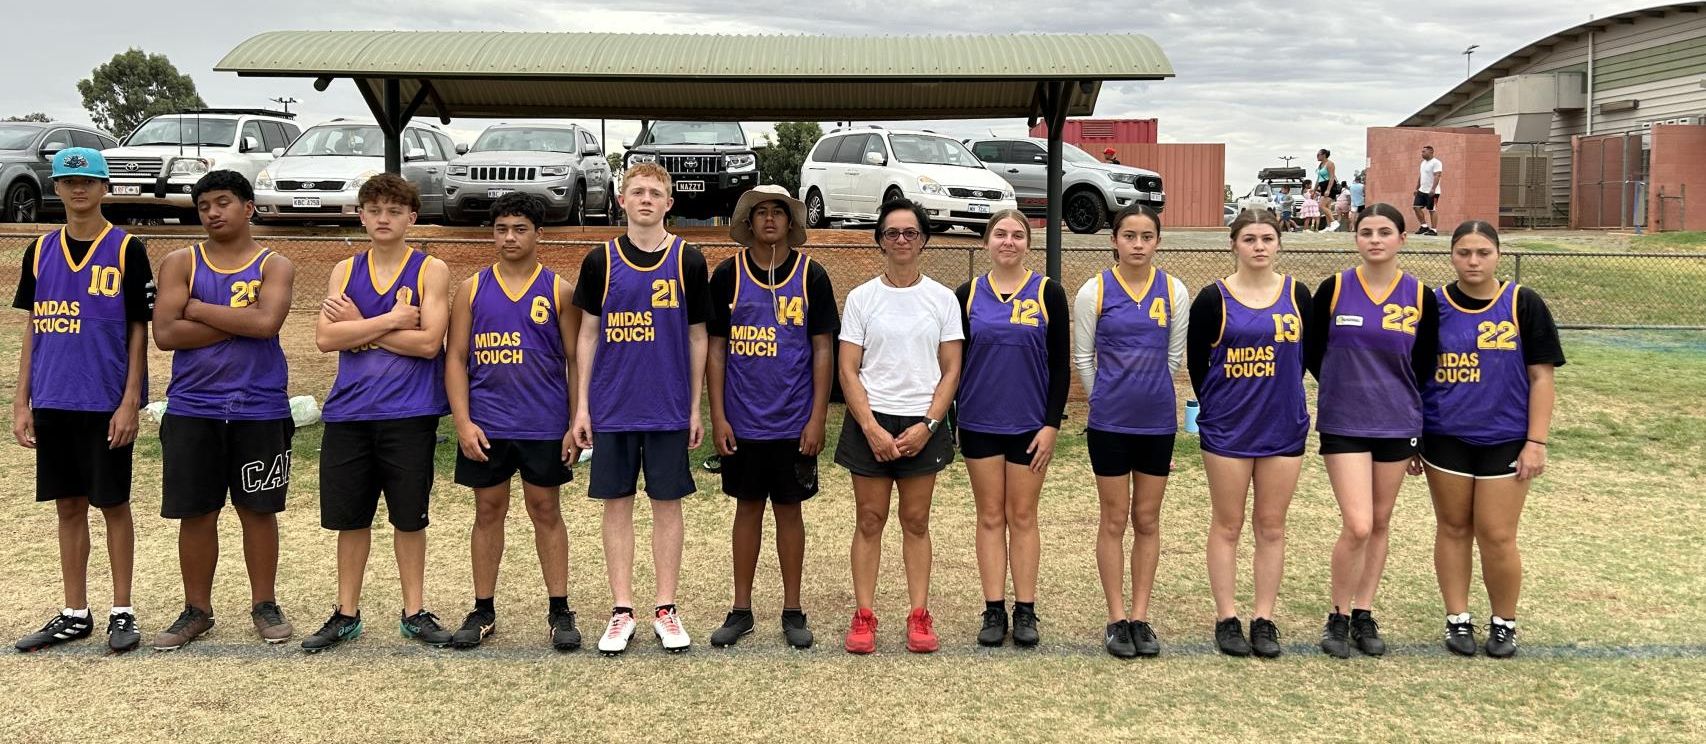 Kambalda's Mixed Touch Rugby Team Rises to the Occasion!